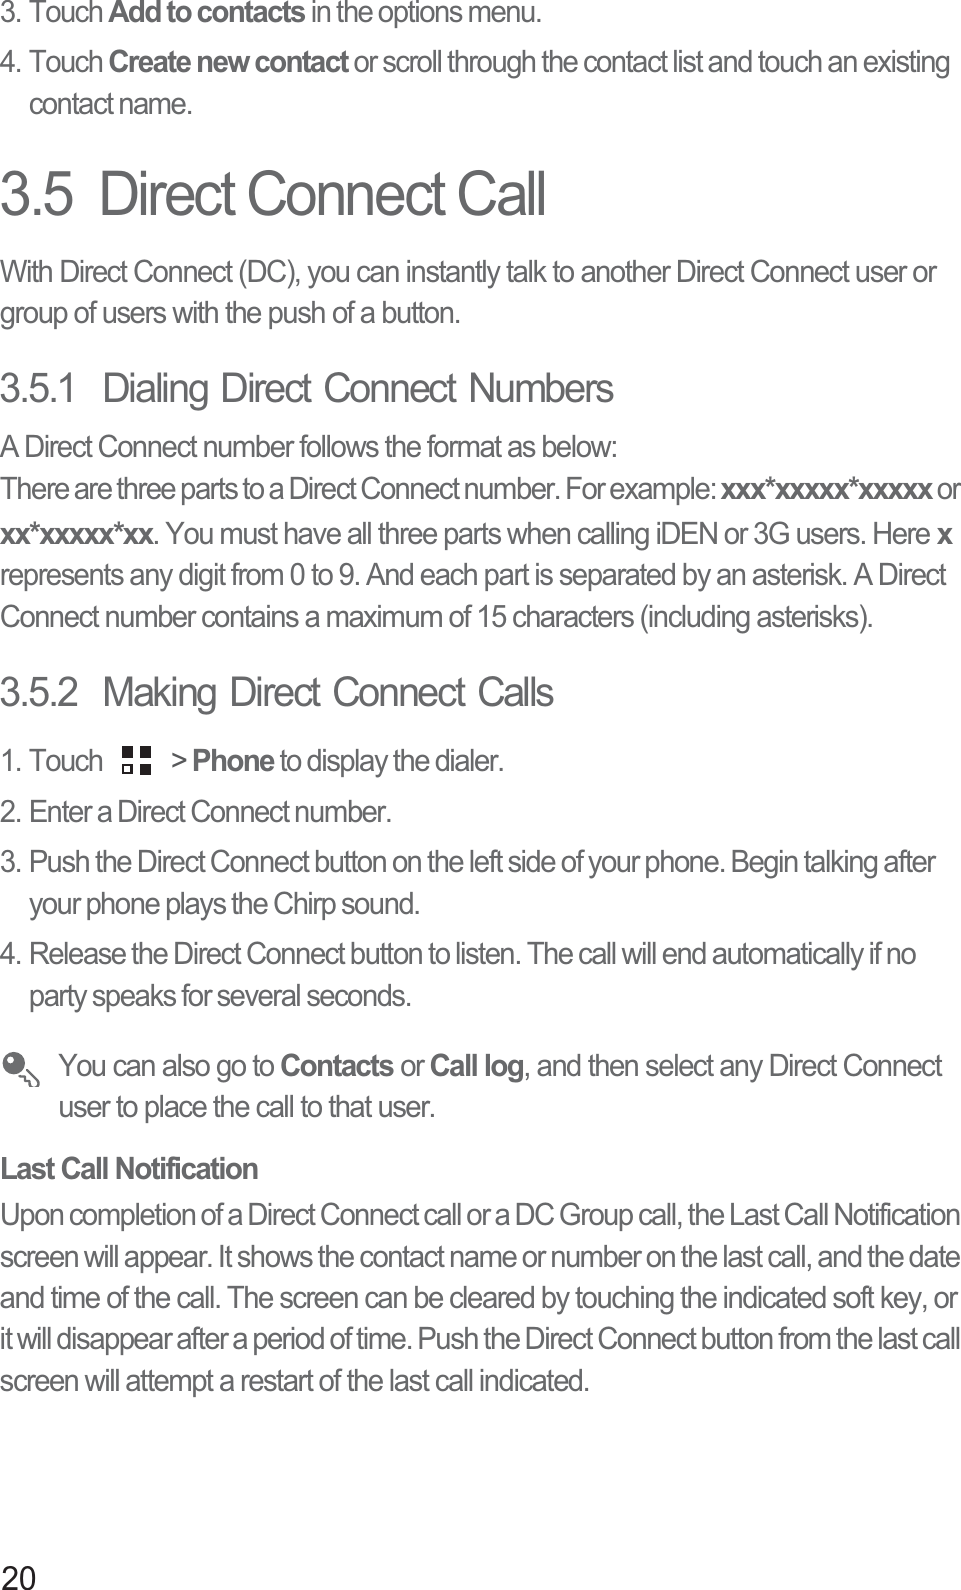 203. Touch Add to contacts in the options menu.4. Touch Create new contact or scroll through the contact list and touch an existing contact name.3.5  Direct Connect CallWith Direct Connect (DC), you can instantly talk to another Direct Connect user or group of users with the push of a button.3.5.1  Dialing Direct Connect NumbersA Direct Connect number follows the format as below:There are three parts to a Direct Connect number. For example: xxx*xxxxx*xxxxx or xx*xxxxx*xx. You must have all three parts when calling iDEN or 3G users. Here xrepresents any digit from 0 to 9. And each part is separated by an asterisk. A Direct Connect number contains a maximum of 15 characters (including asterisks).3.5.2  Making Direct Connect Calls1. Touch   &gt; Phone to display the dialer.2. Enter a Direct Connect number.3. Push the Direct Connect button on the left side of your phone. Begin talking after your phone plays the Chirp sound.4. Release the Direct Connect button to listen. The call will end automatically if no party speaks for several seconds.You can also go to Contacts or Call log, and then select any Direct Connect user to place the call to that user.Last Call NotificationUpon completion of a Direct Connect call or a DC Group call, the Last Call Notification screen will appear. It shows the contact name or number on the last call, and the date and time of the call. The screen can be cleared by touching the indicated soft key, or it will disappear after a period of time. Push the Direct Connect button from the last call screen will attempt a restart of the last call indicated.